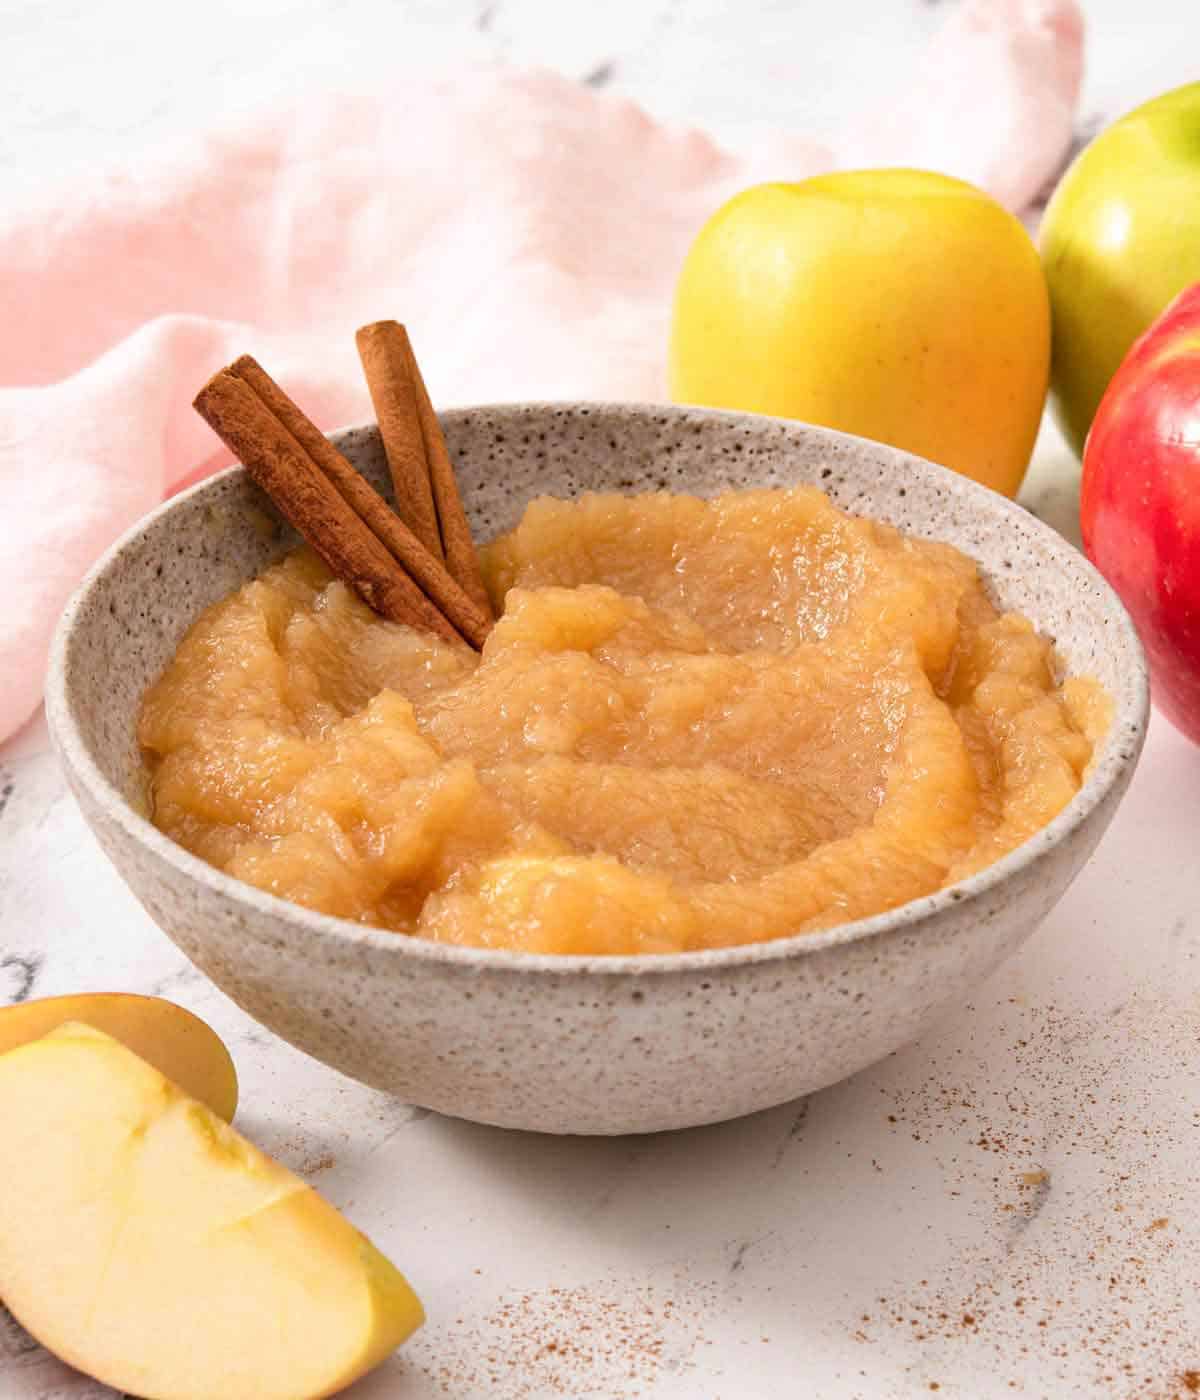 A bowl of applesauce with two cinnamon sticks stuck inside with apples around it.